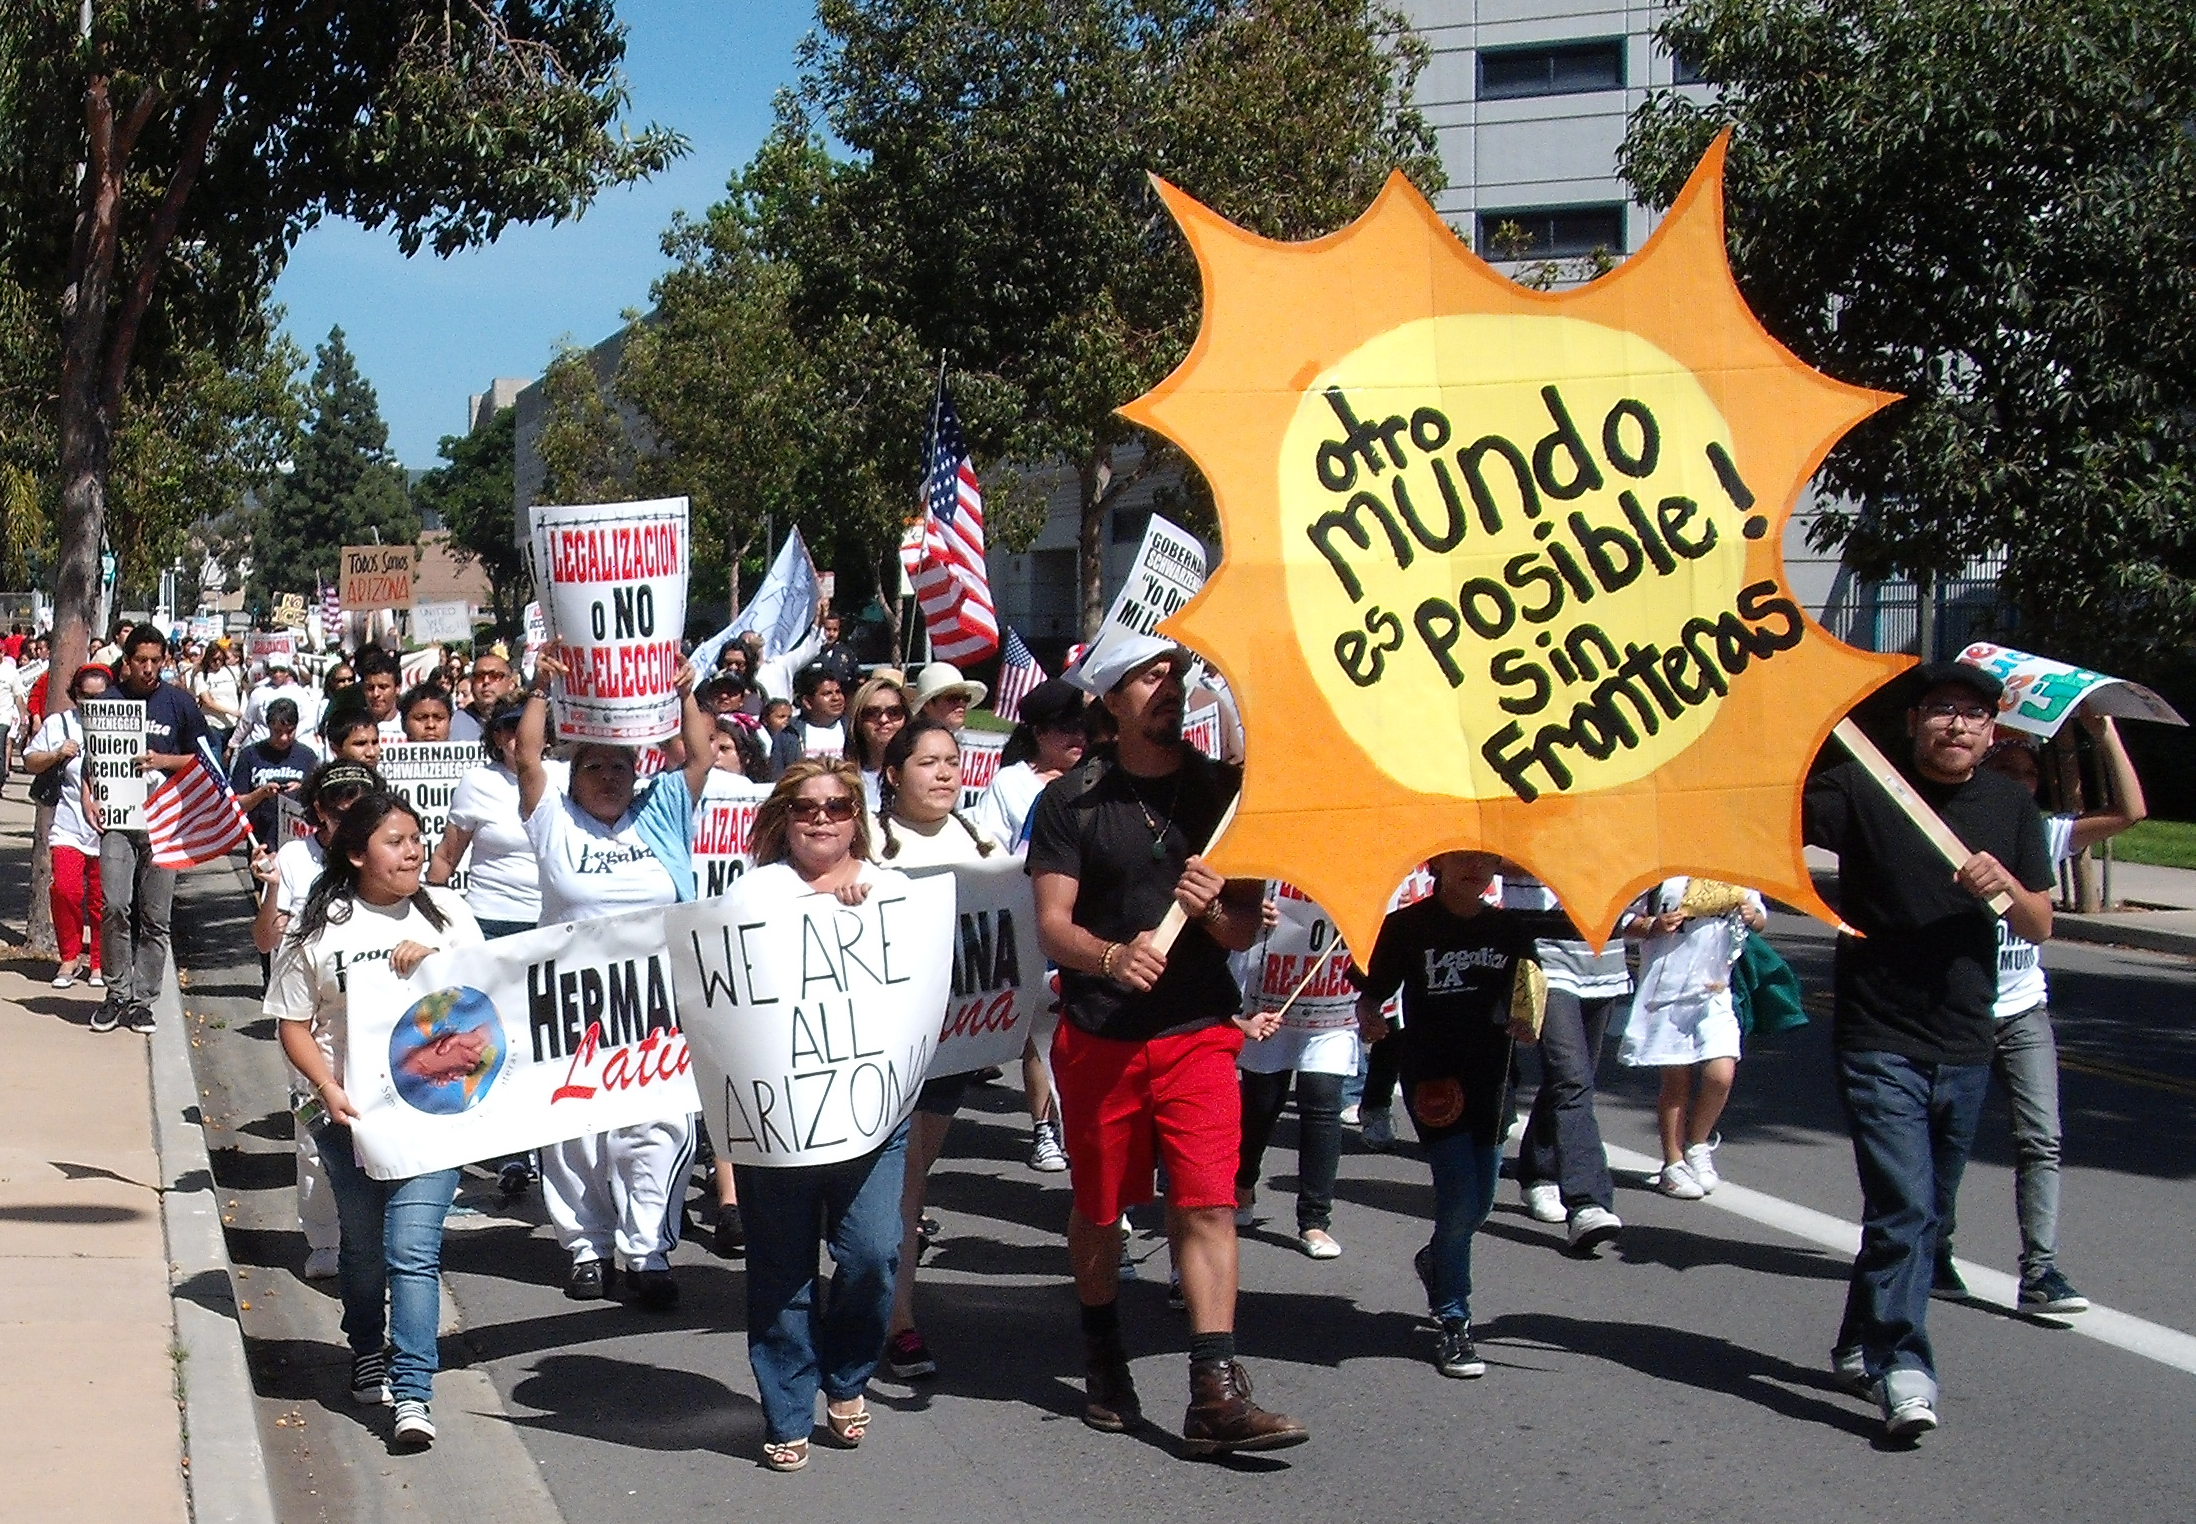 Photograph of a march calling for the legalization of undocumented workers which took place in downtown Santa Ana, California on the afternoon of May 1, 2010. GREEN PARTY U.S. SENATE CANDIDATE […]